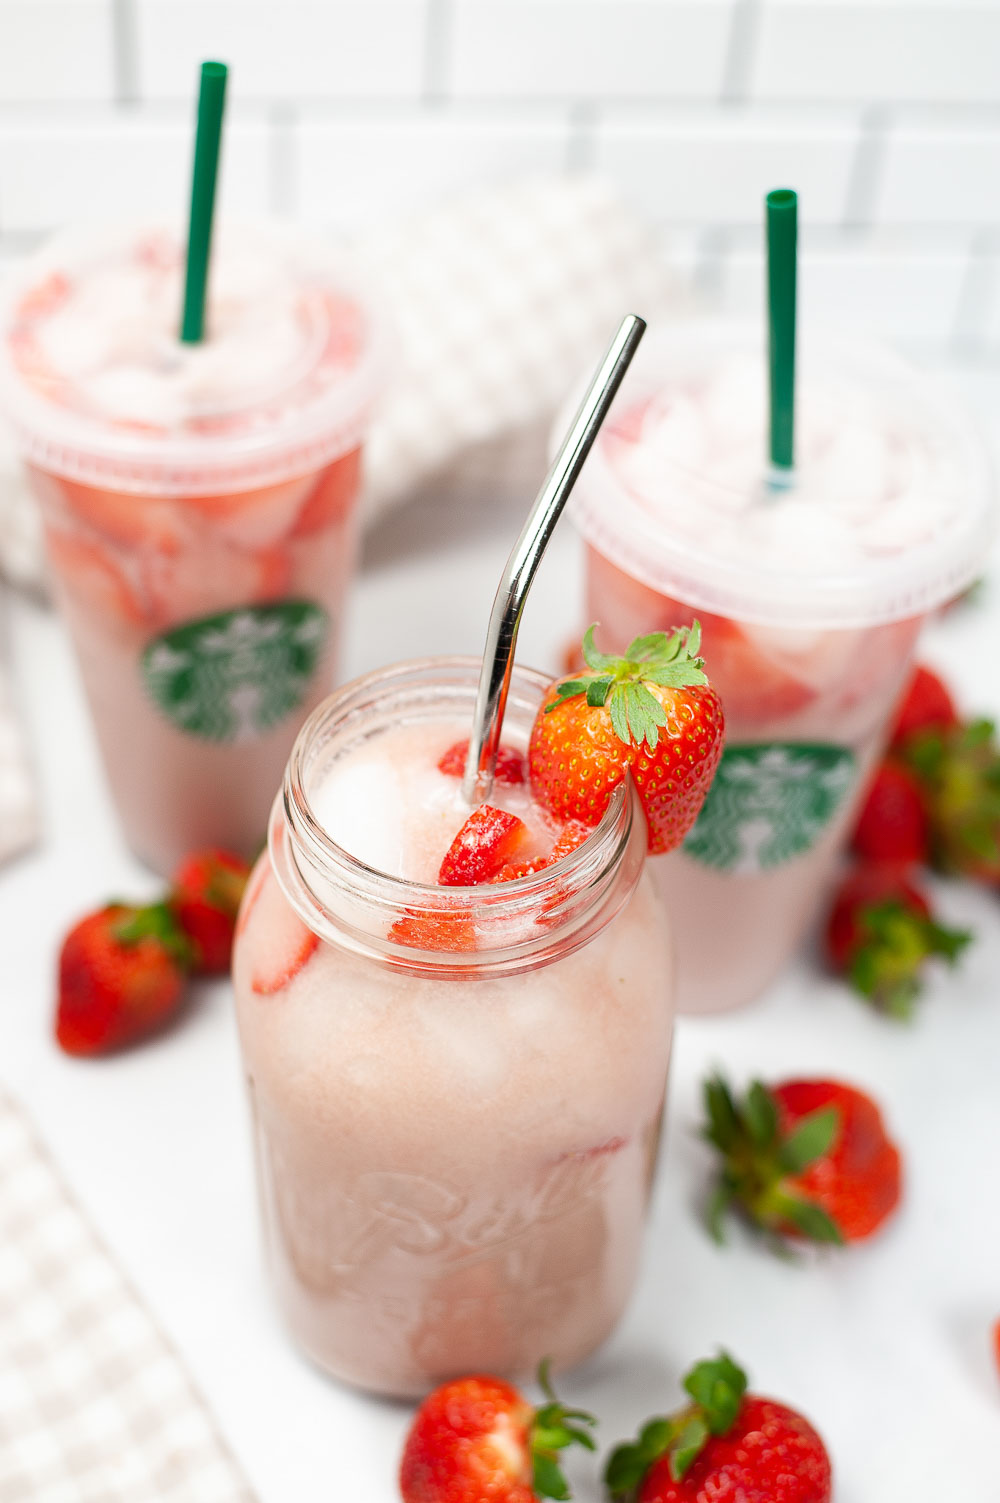 When you’re craving something fruity, mix up a Starbucks pink drink. It’s both fruity and tart, all held together with an understated creaminess. This is the perfect Starbucks copycat!  